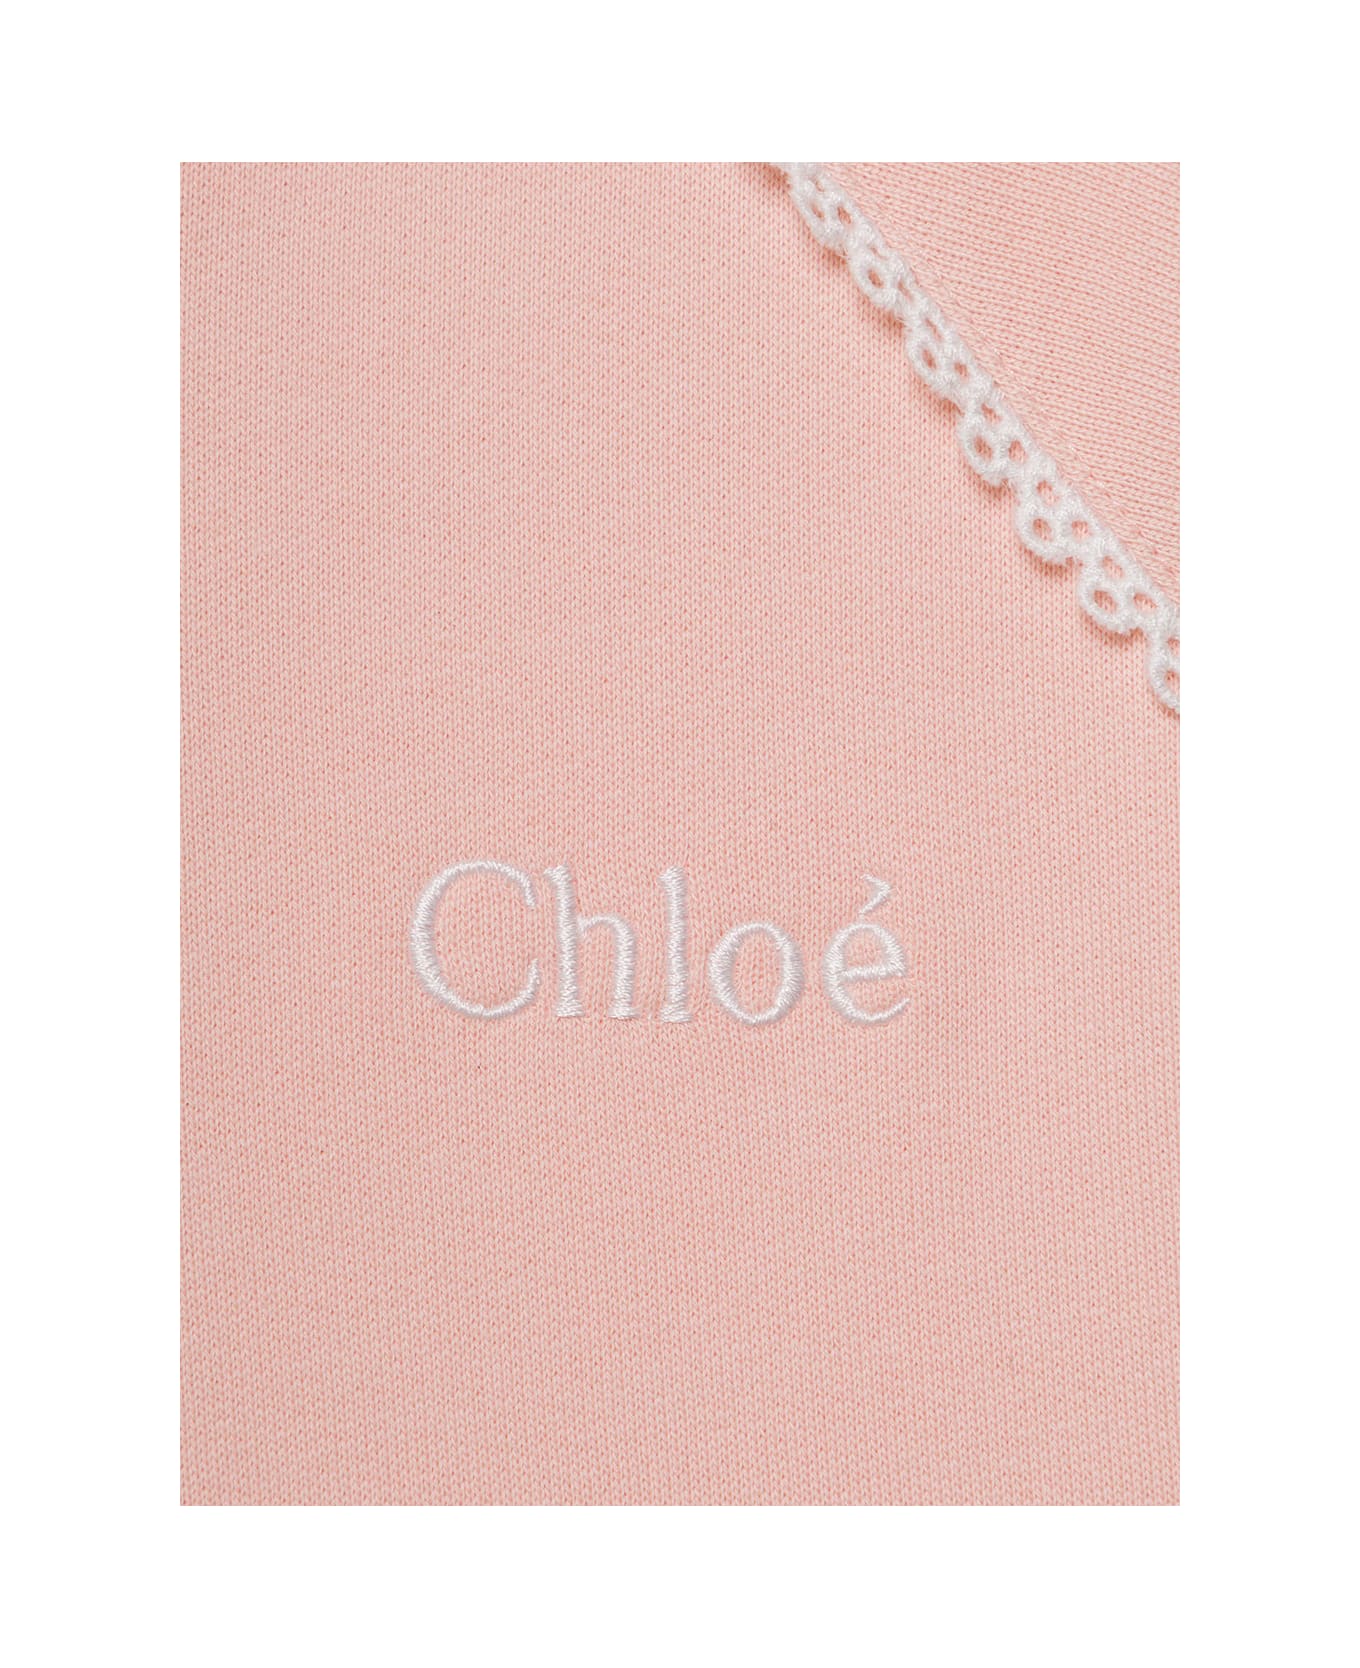 Chloé Pink Hoodie With Lace Inserts In Cotton Girl - Pink